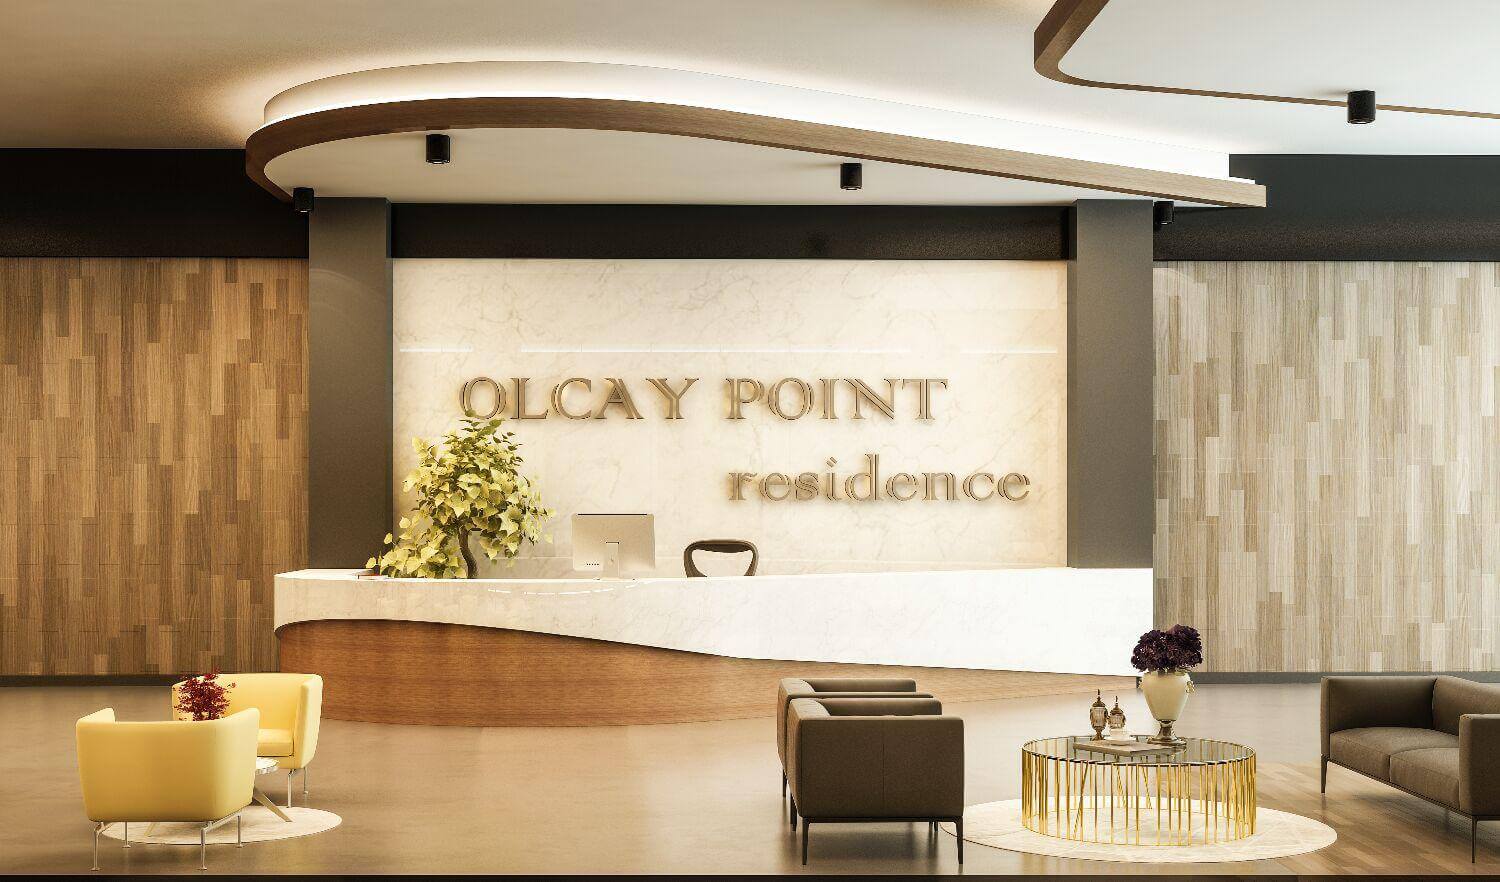 Olcay Point Project residential and investment